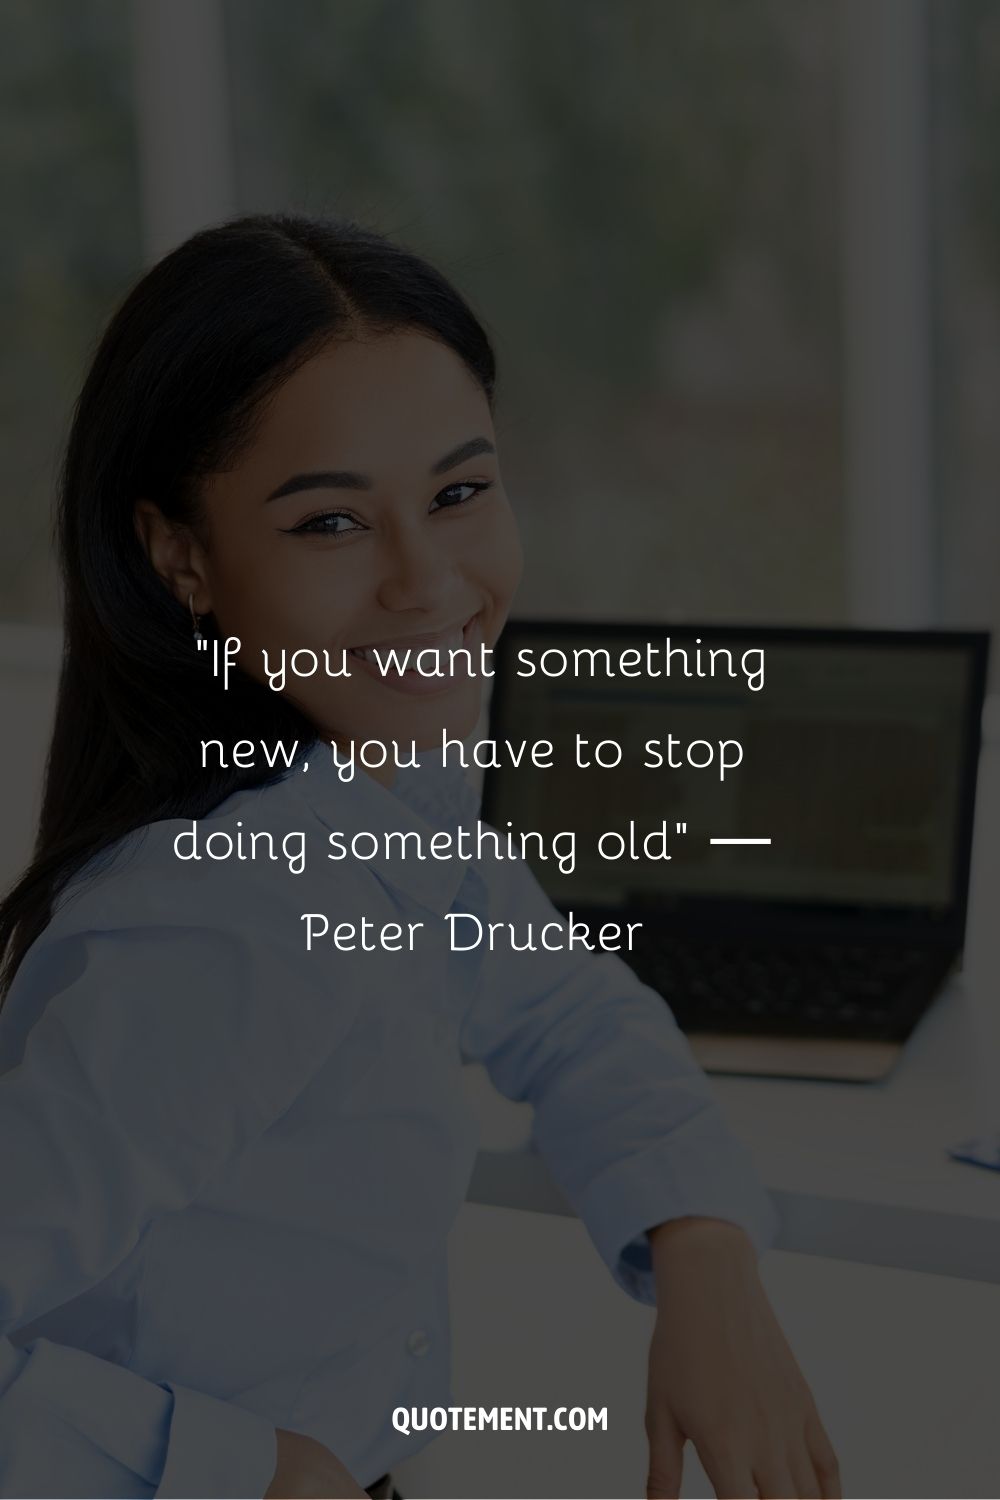 “If you want something new, you have to stop doing something old” ― Peter Drucker